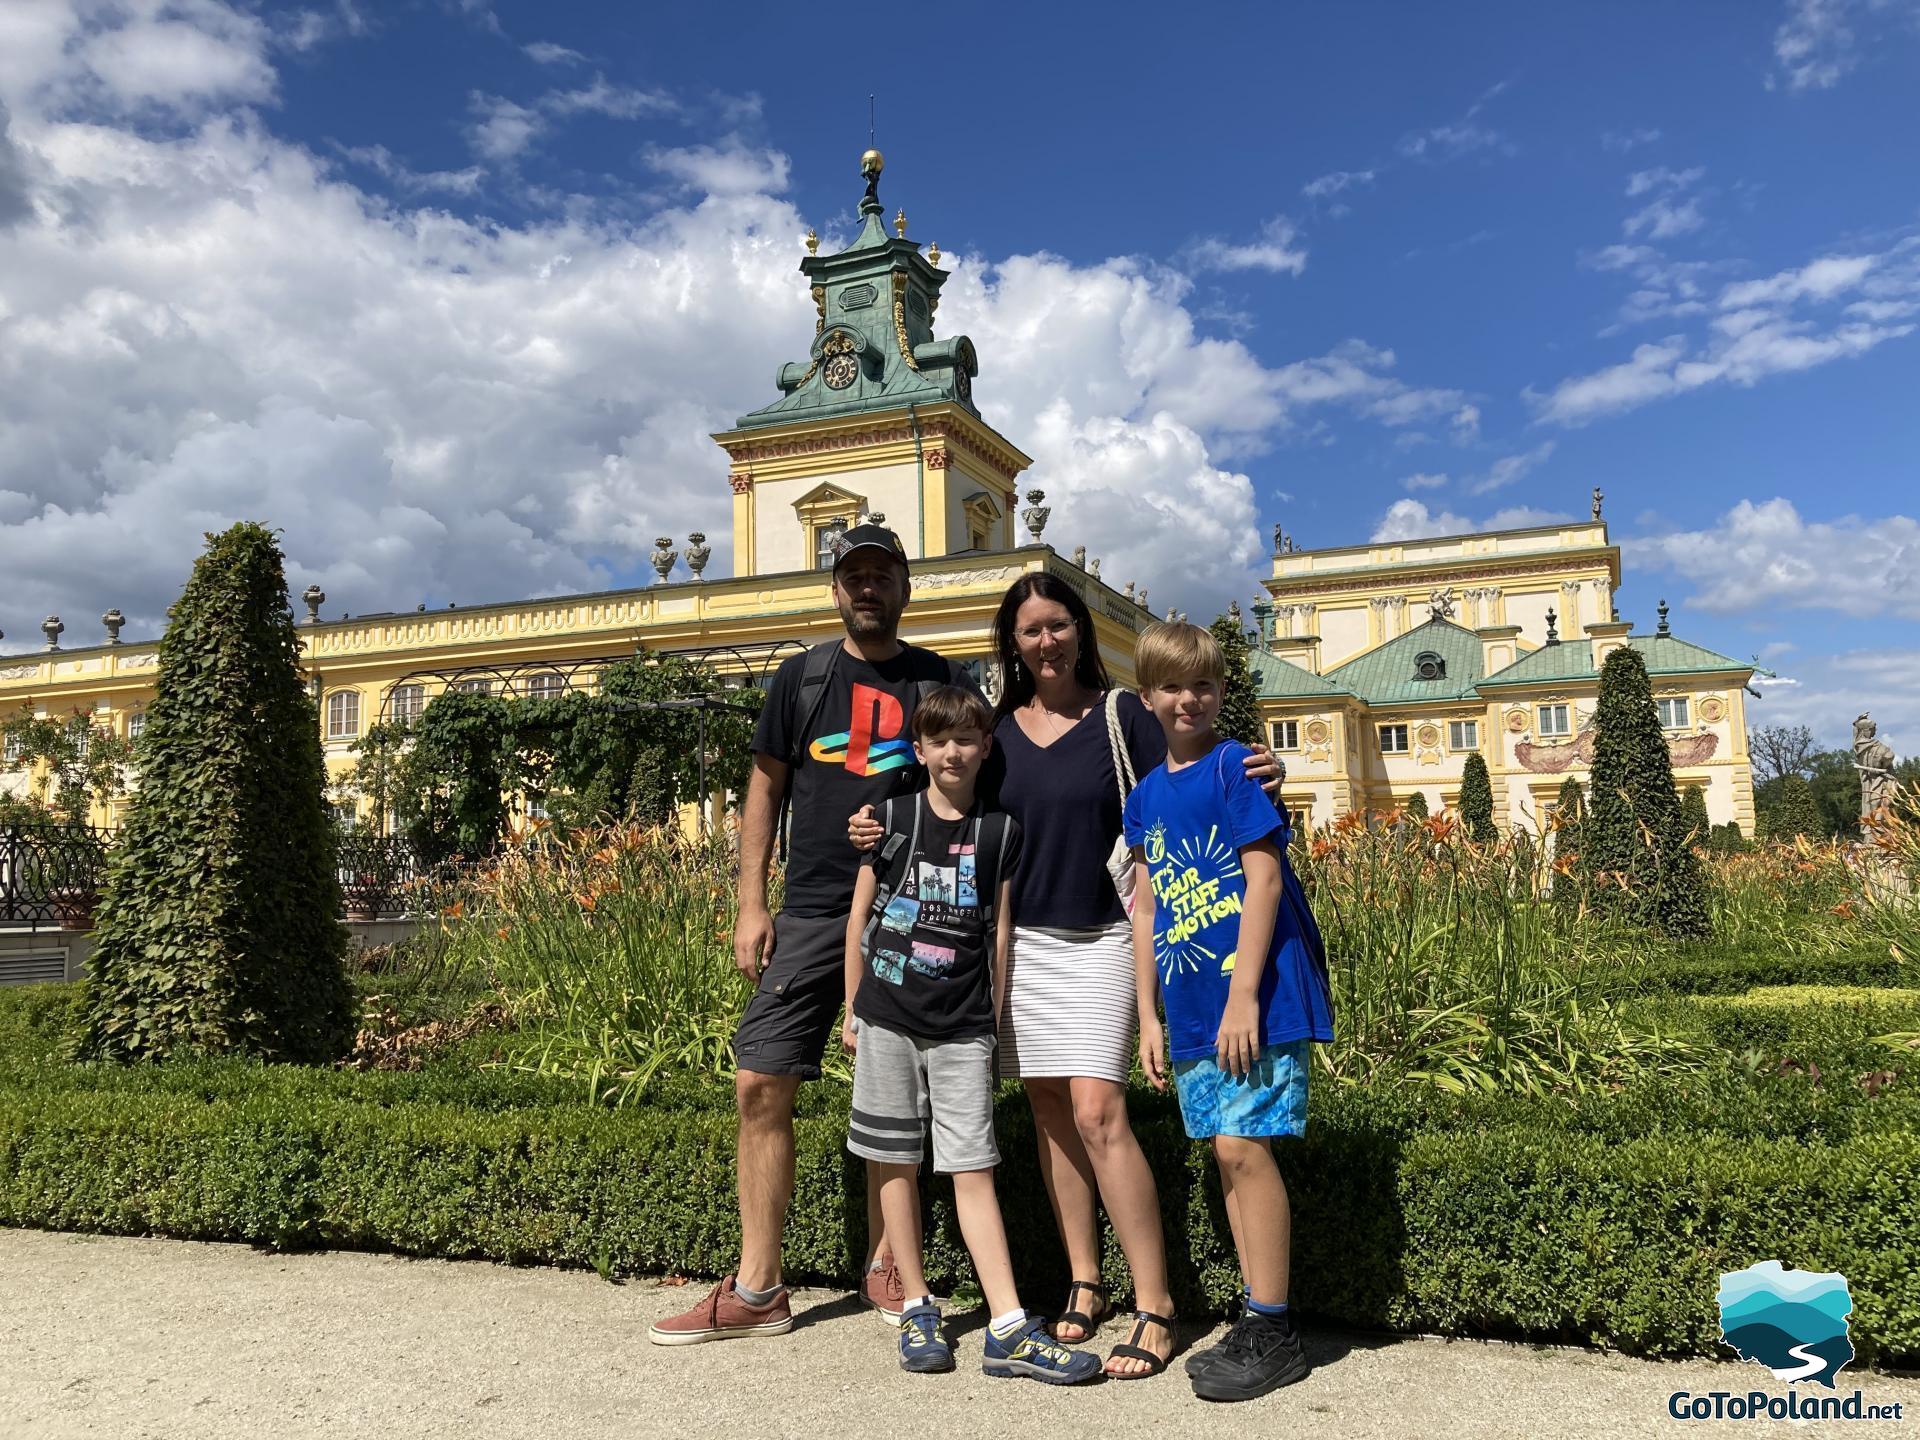 A woman, two boys and a man are standing in the garden which belongs to the palace